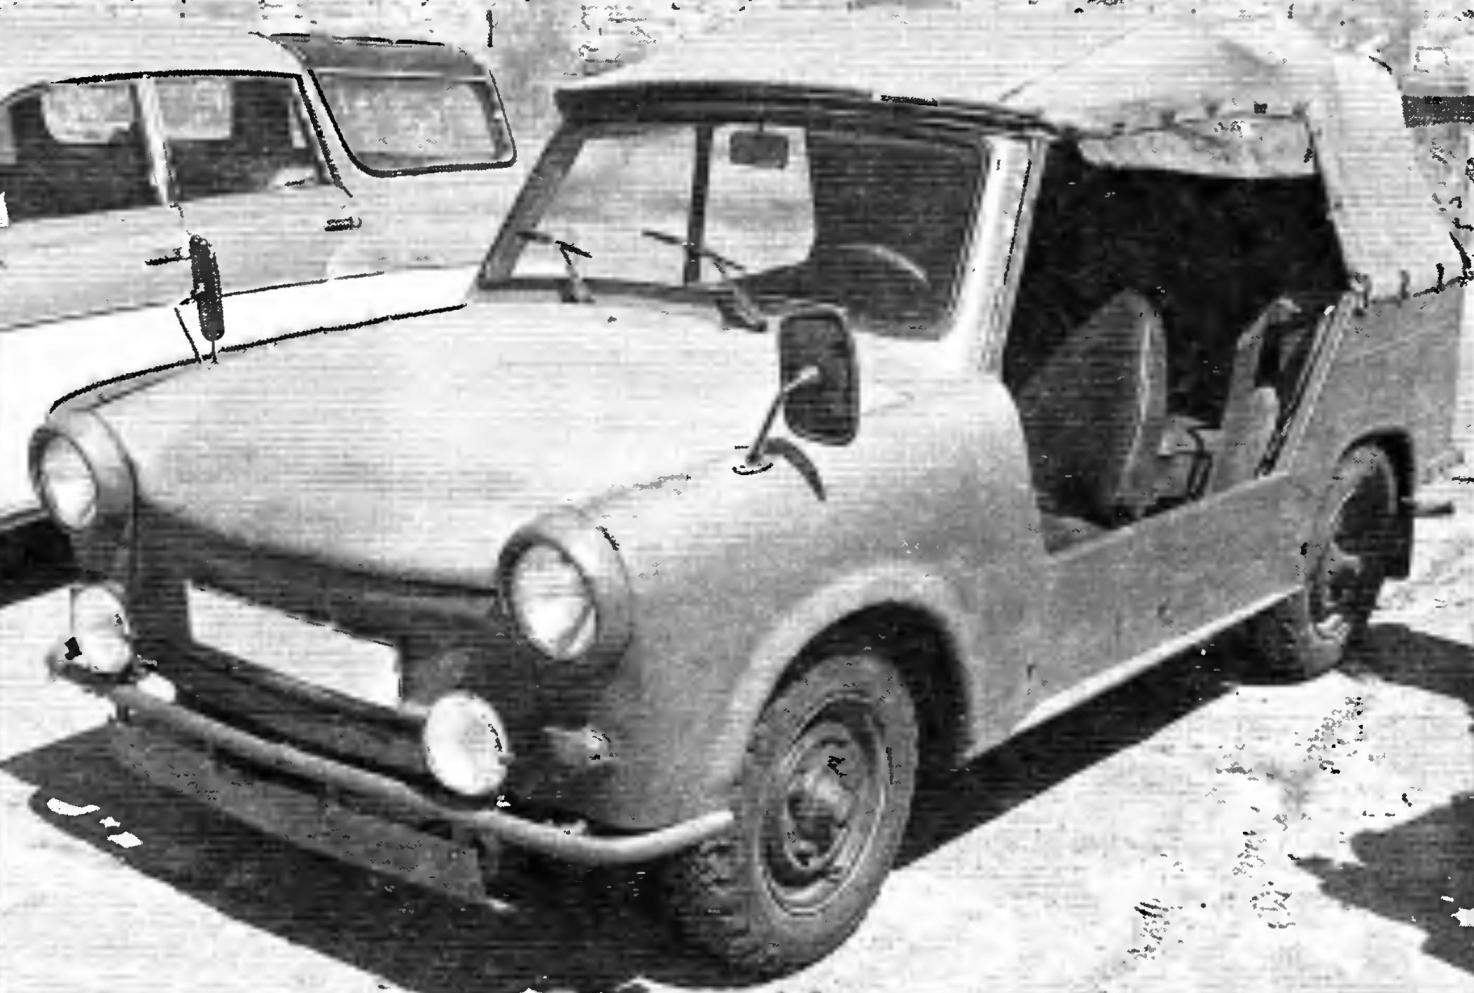 Military variant of the small car Trabant P601 Kubel. As claimed, these vehicles were patrolling the Berlin wall of course, on the East side,